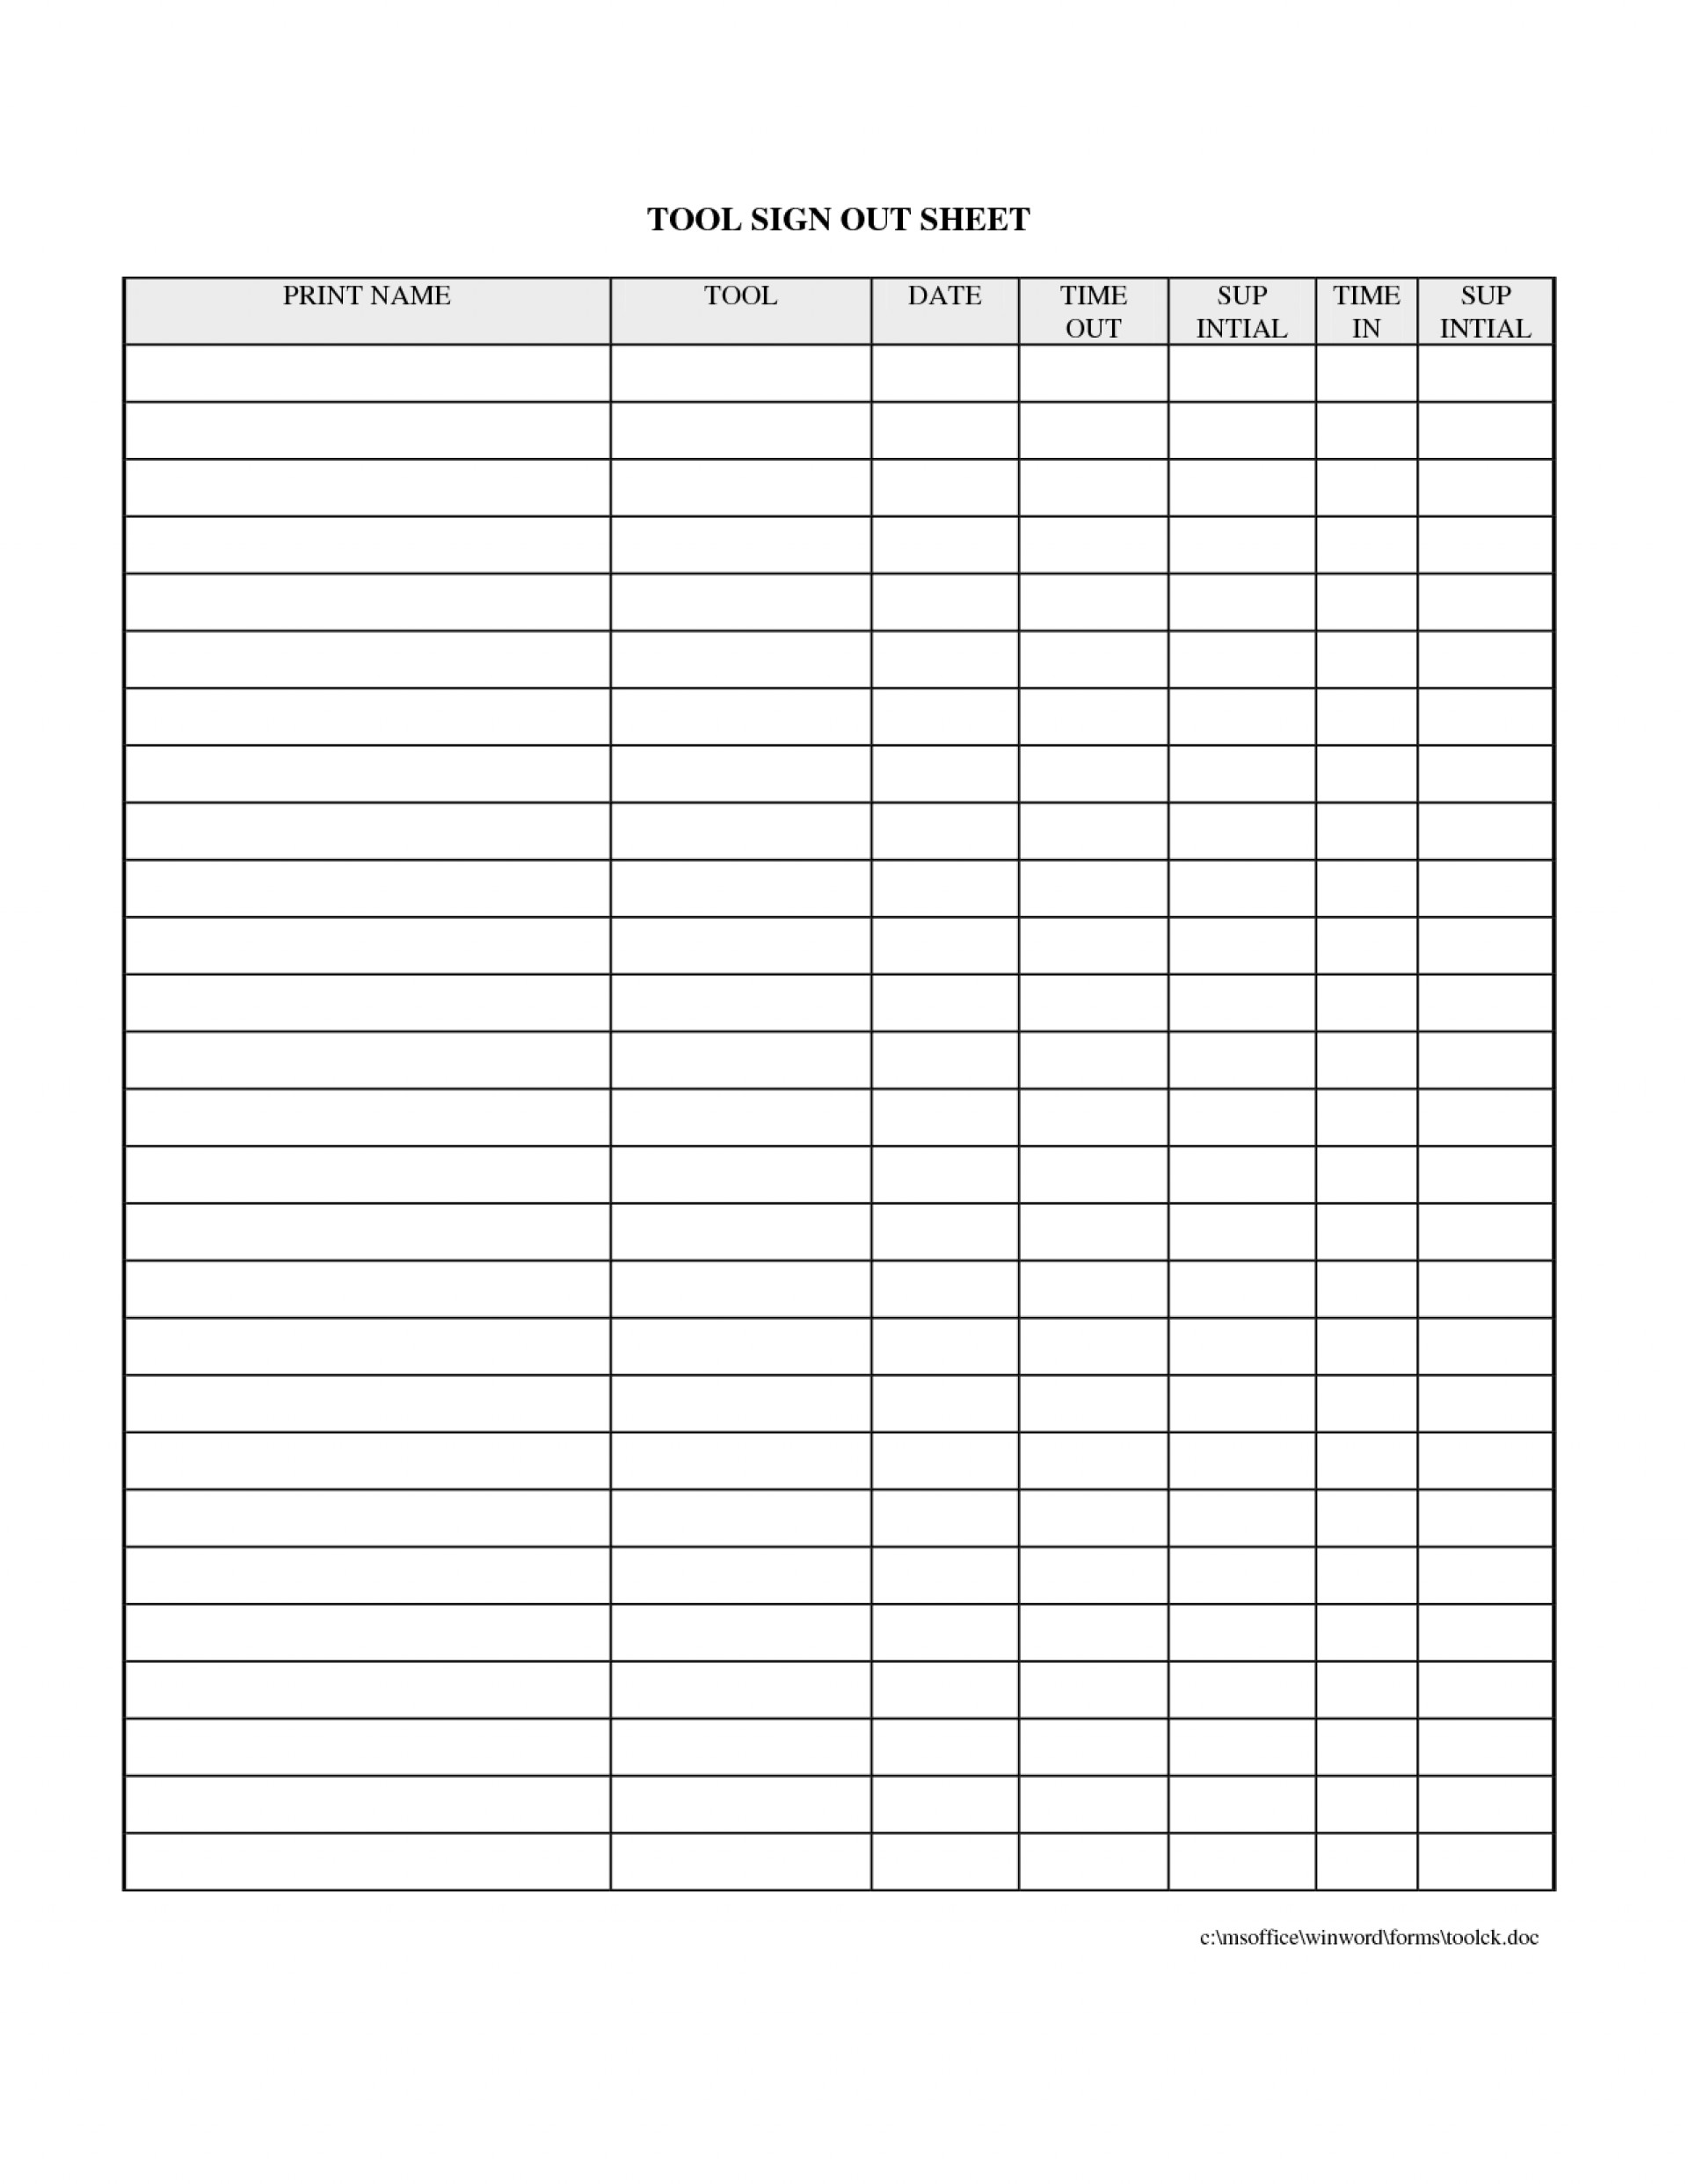 023 Equipment Sign Out Sheet Template Ideas Book Printable Tool Best - Free Printable Sign In And Out Sheets